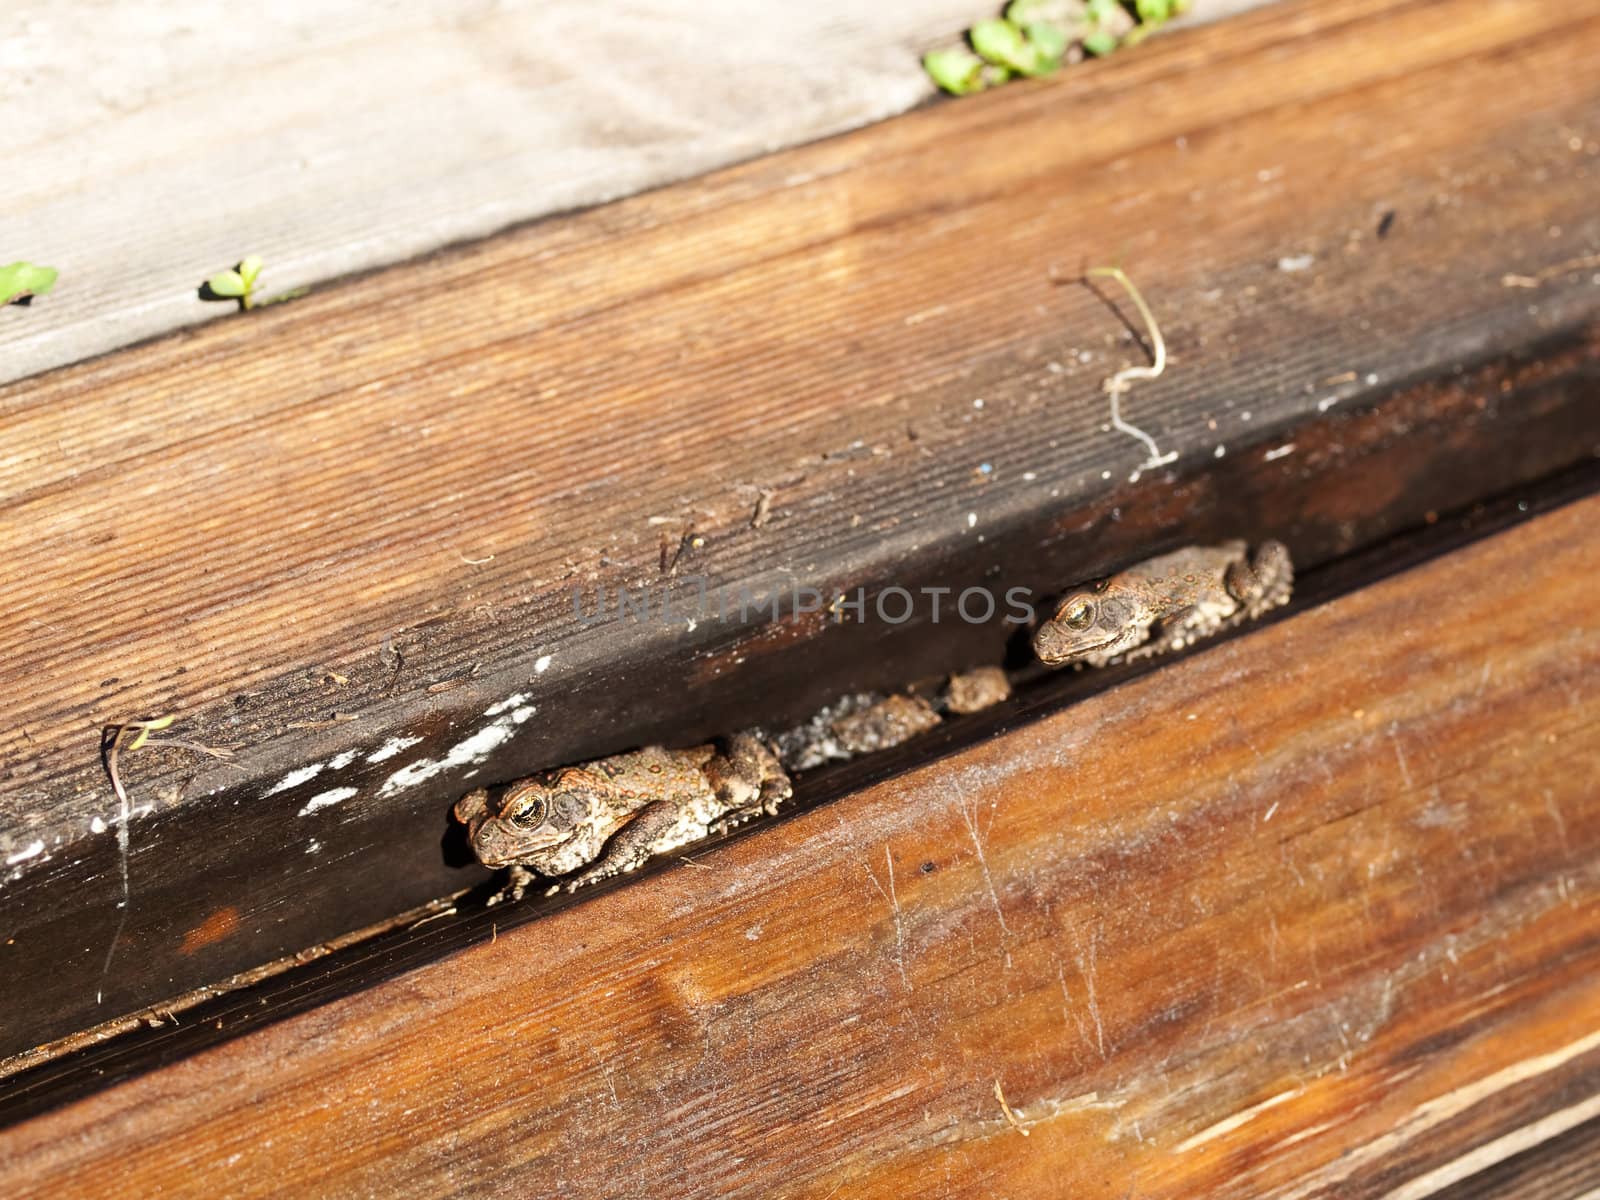 Cane toads sheltering between timber boards